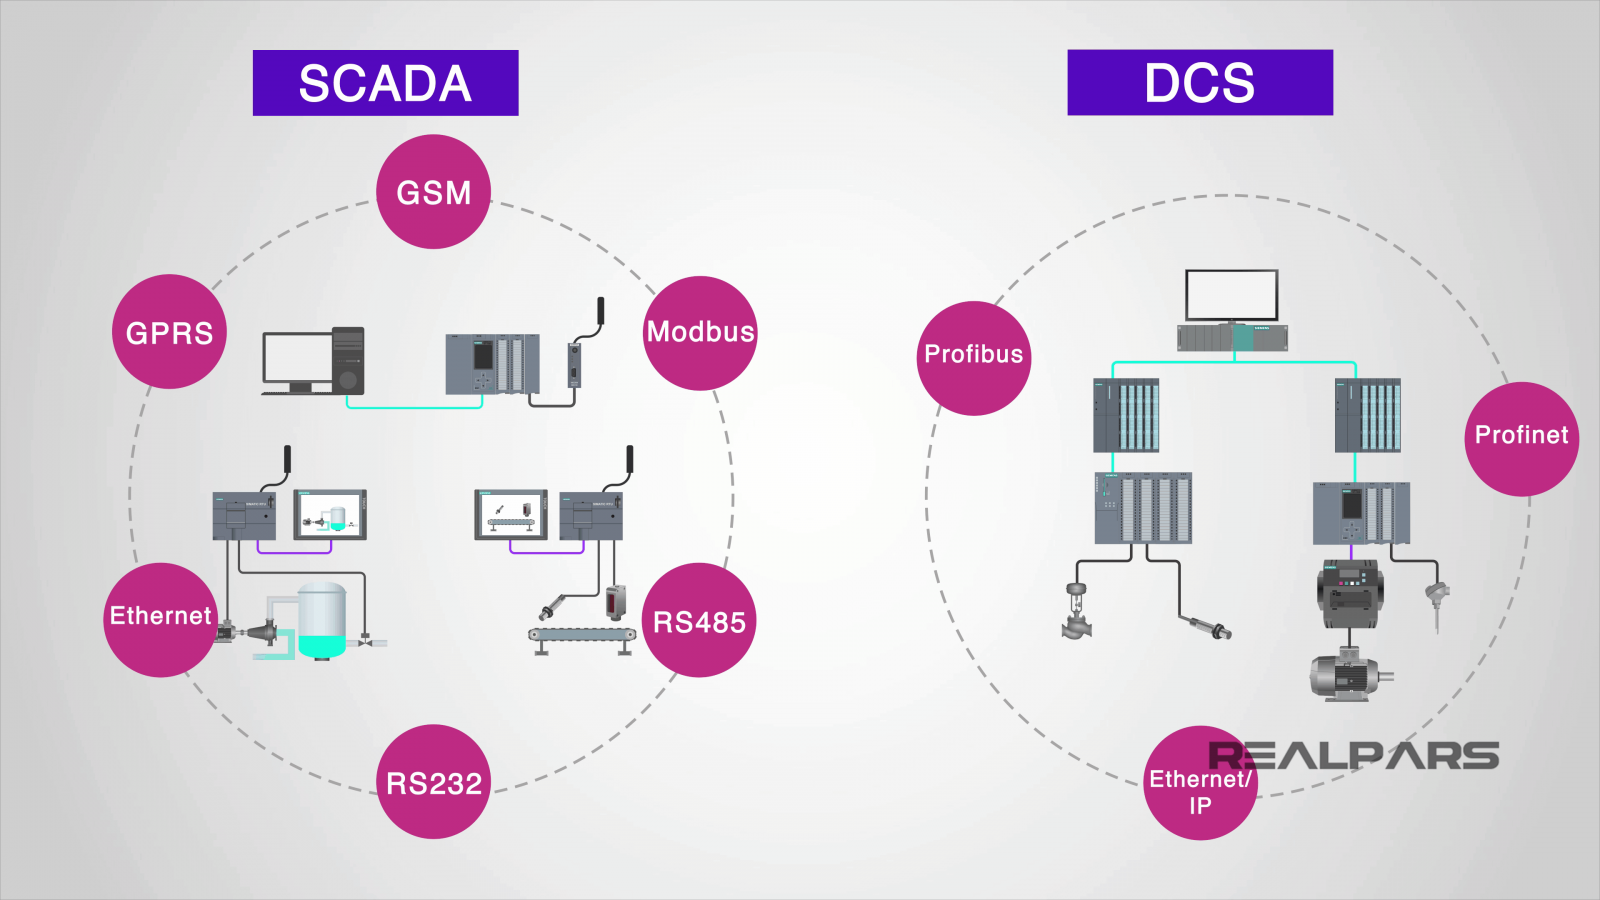 What are the Differences Between DCS and SCADA? | RealPars